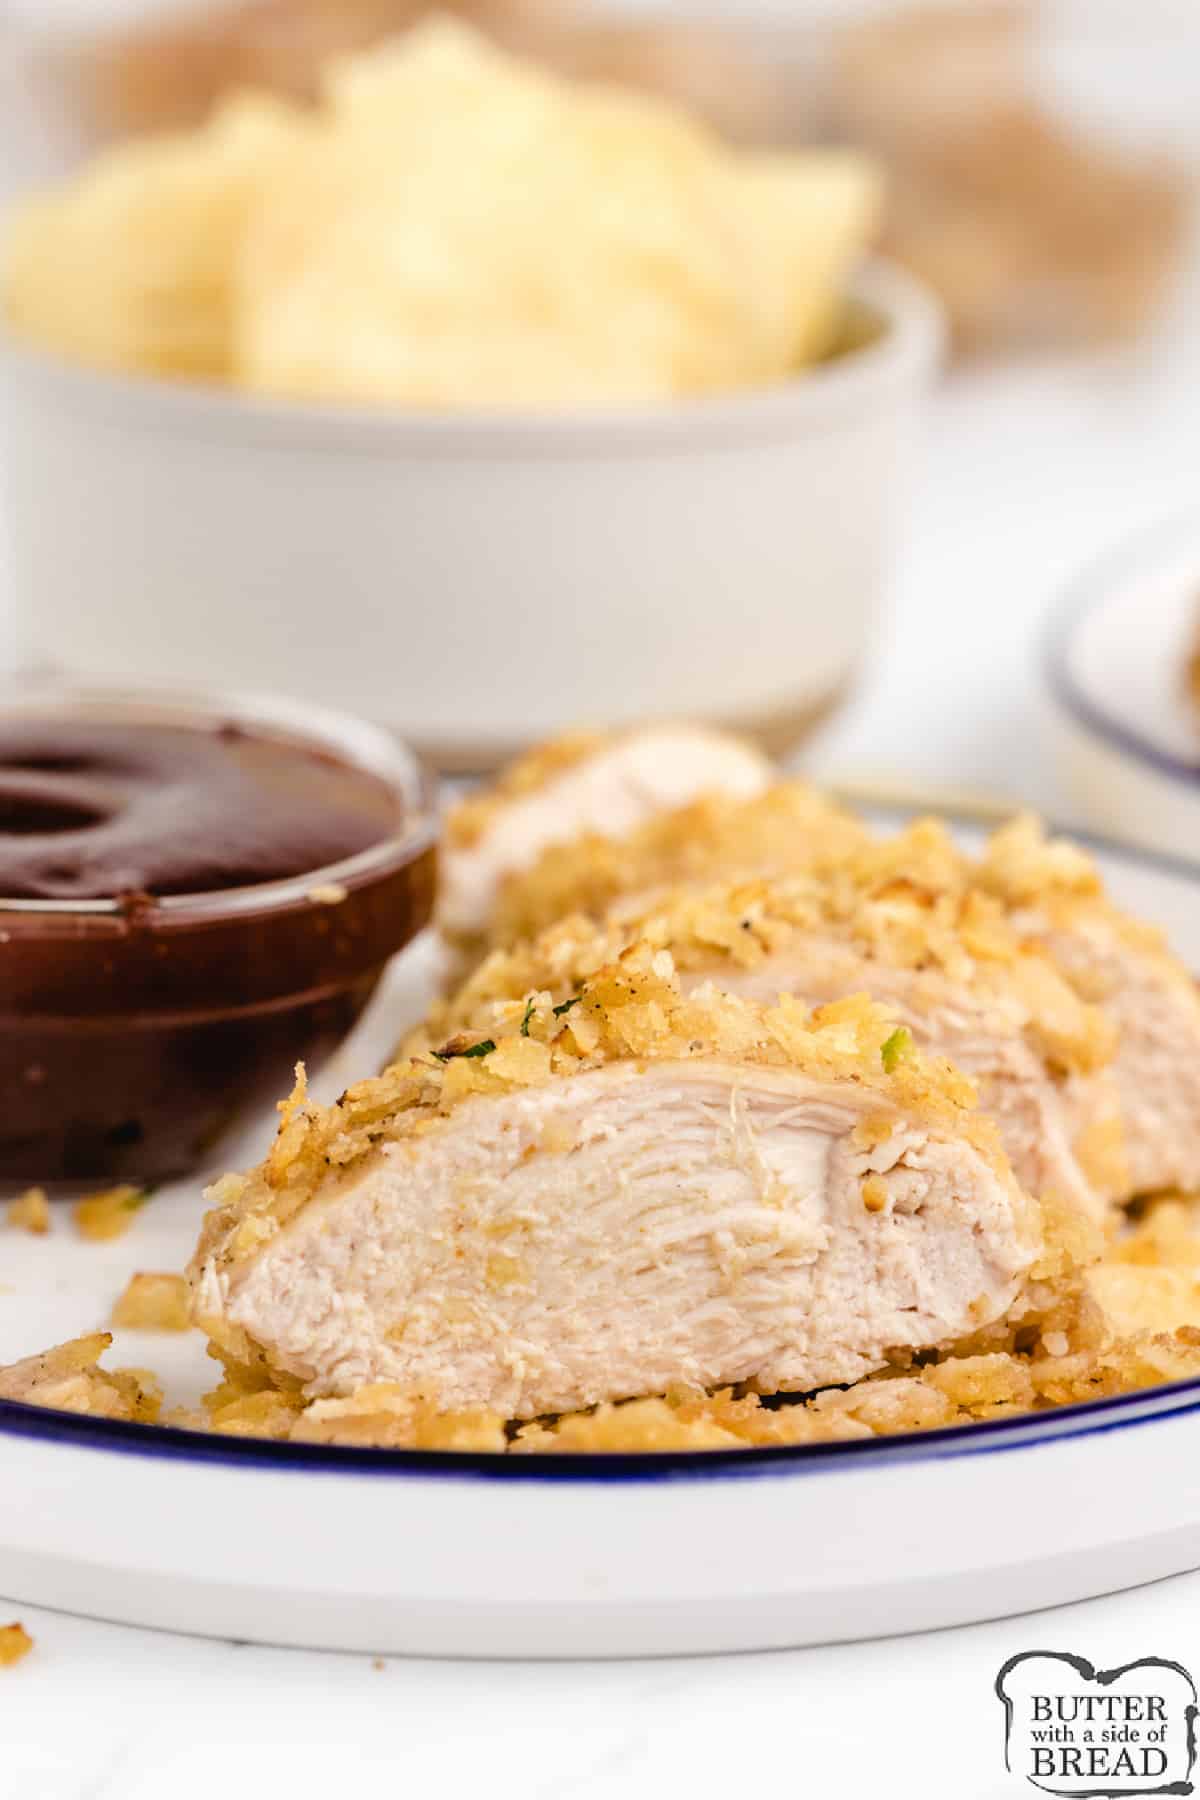 Chicken breasts coated in crushed Lays potato chips